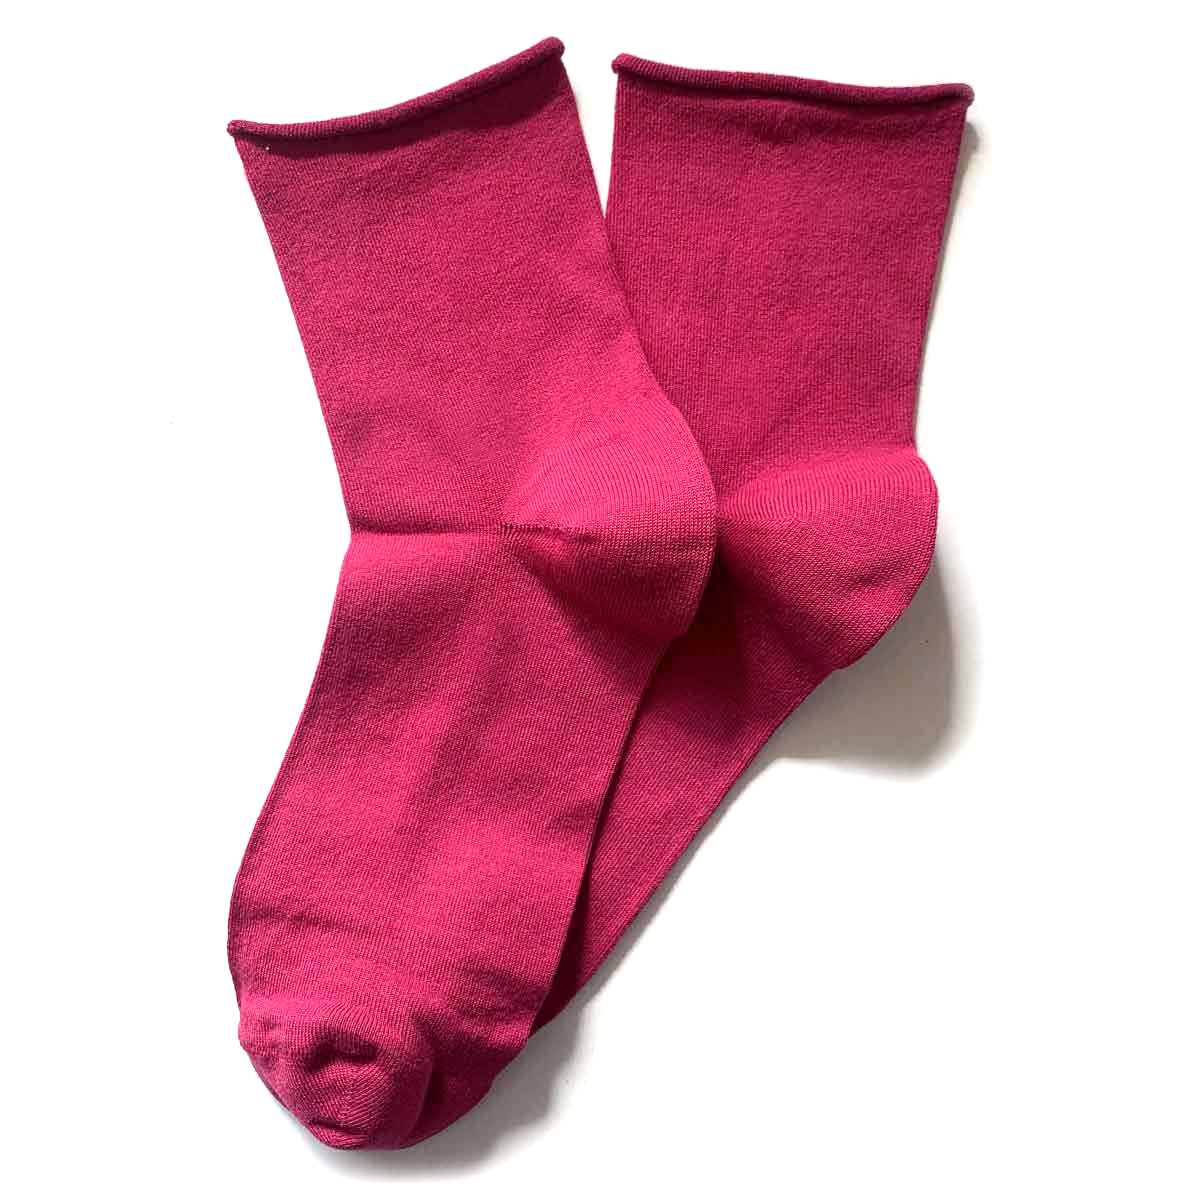 Soft 82% cotton socks with a rolled hem - socks that don&#39;t tighten